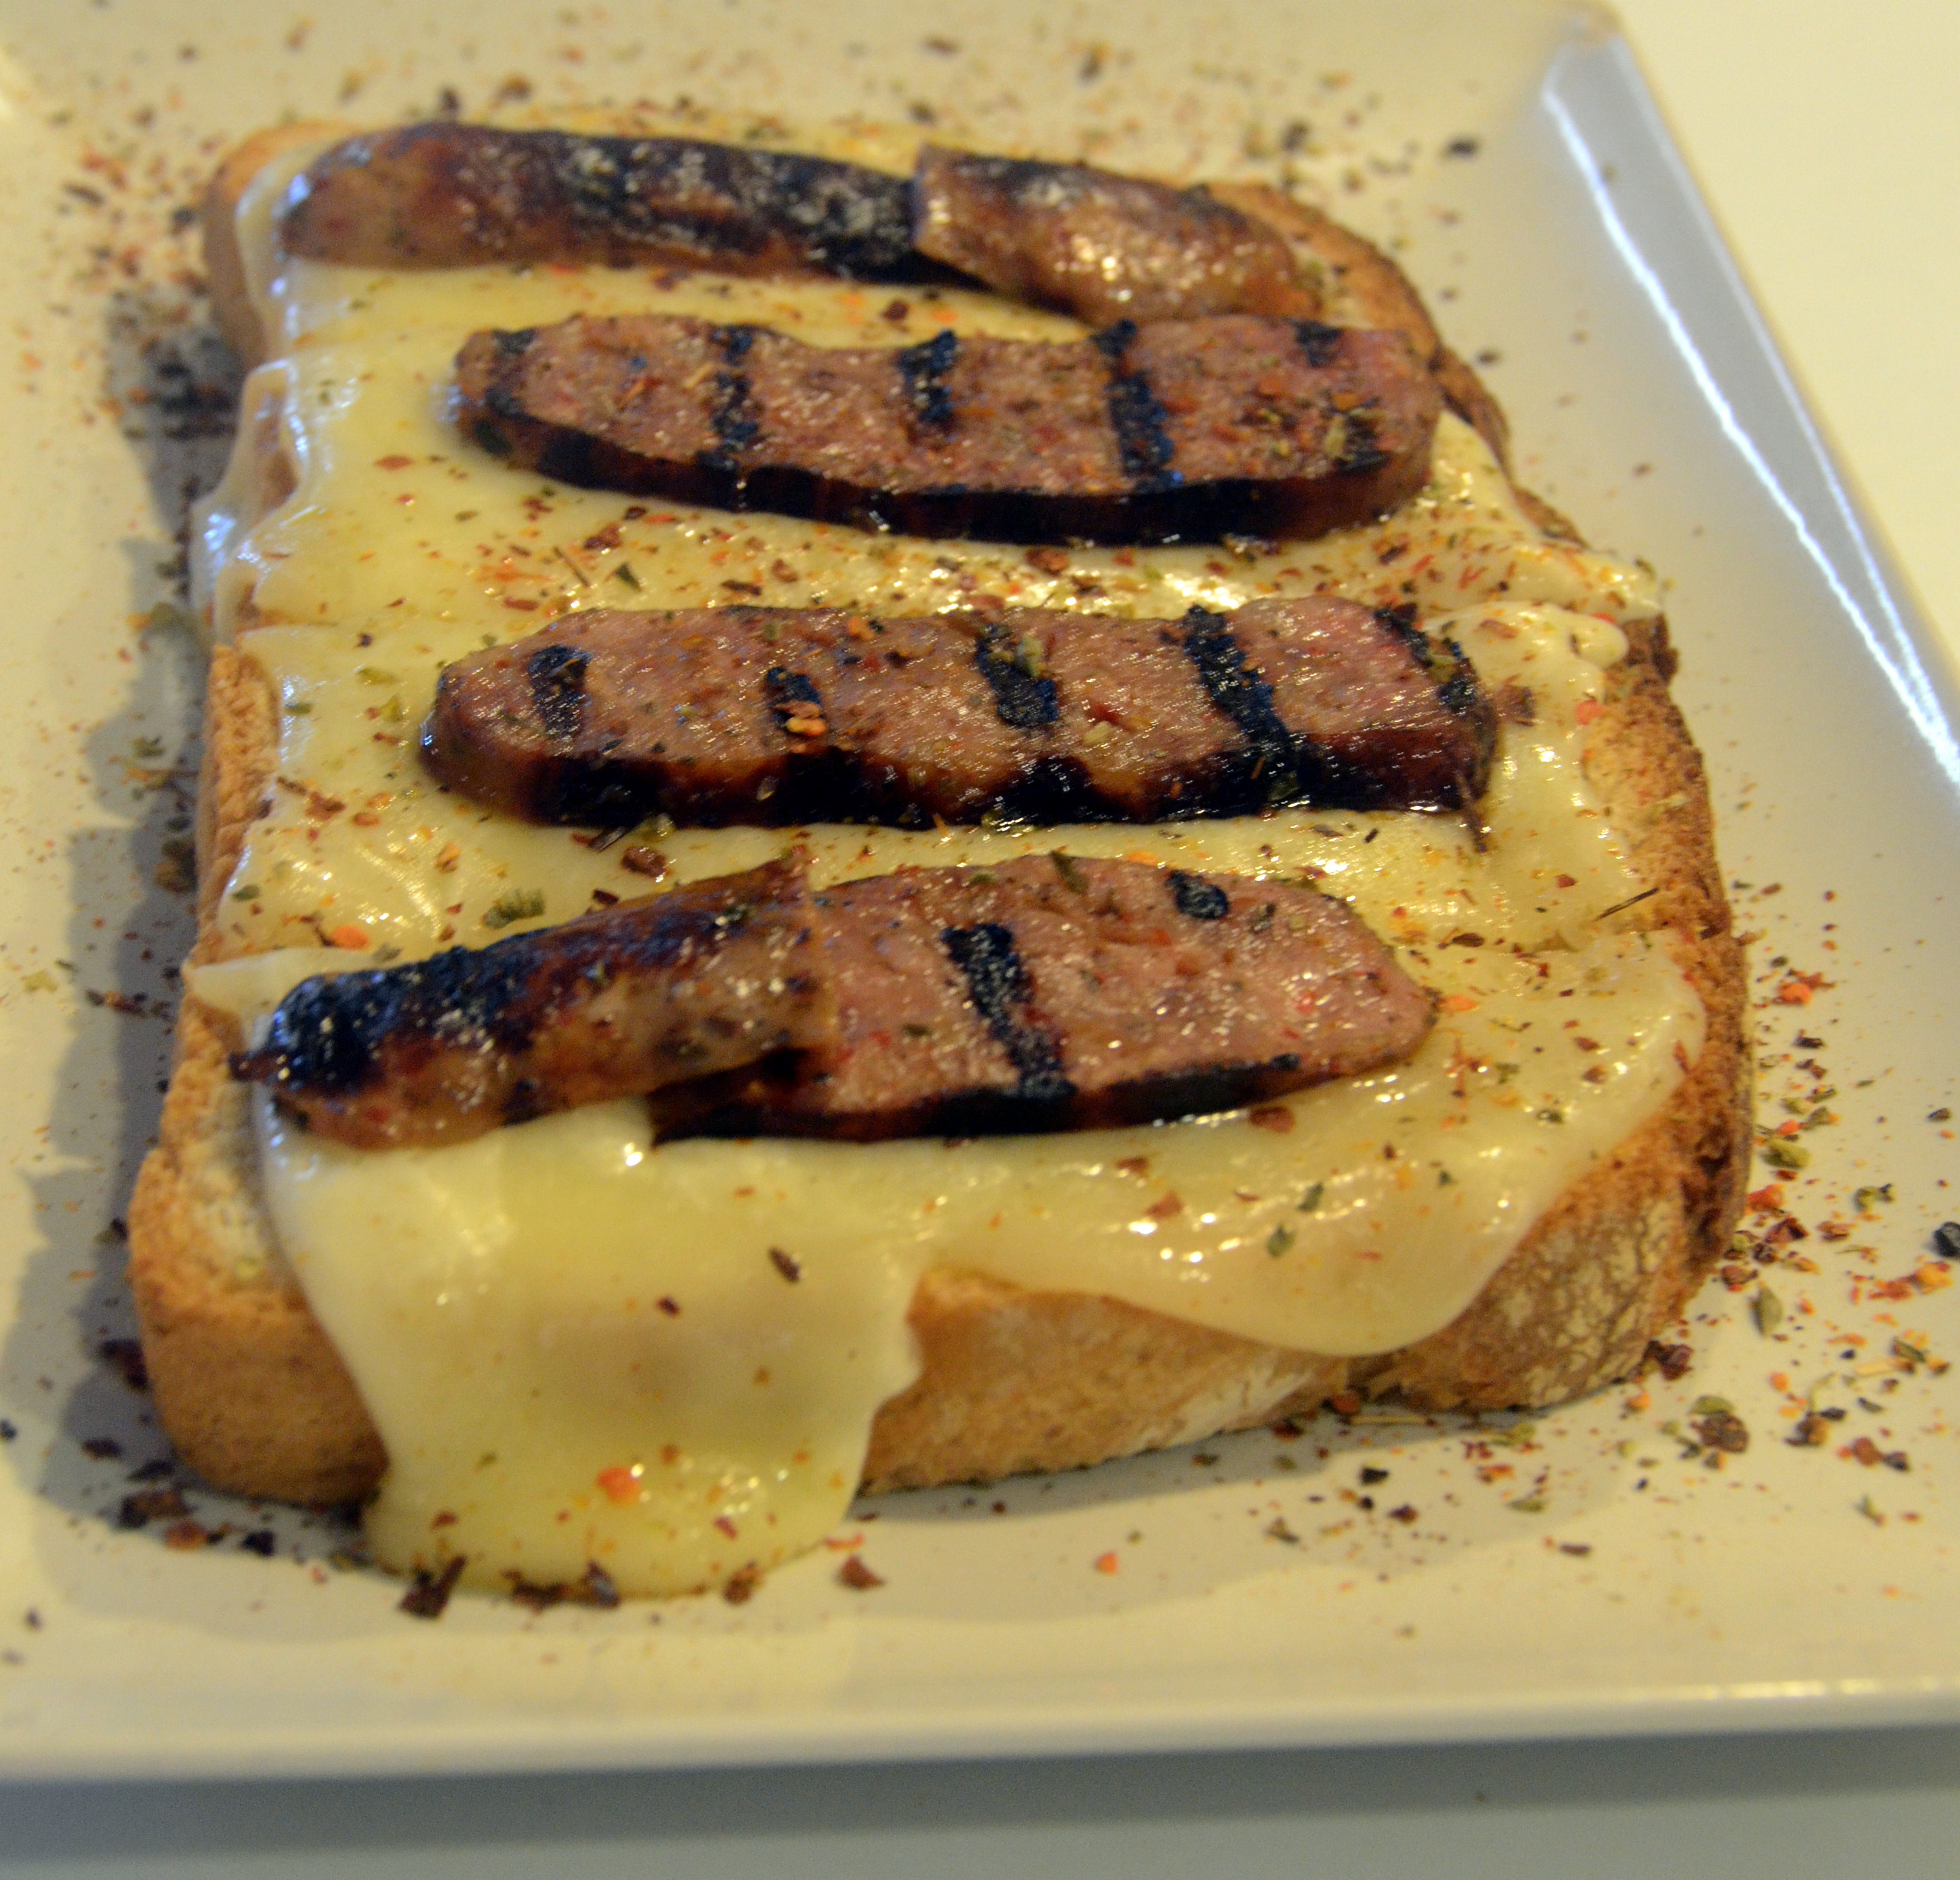 Provolone cheese with creole sausage